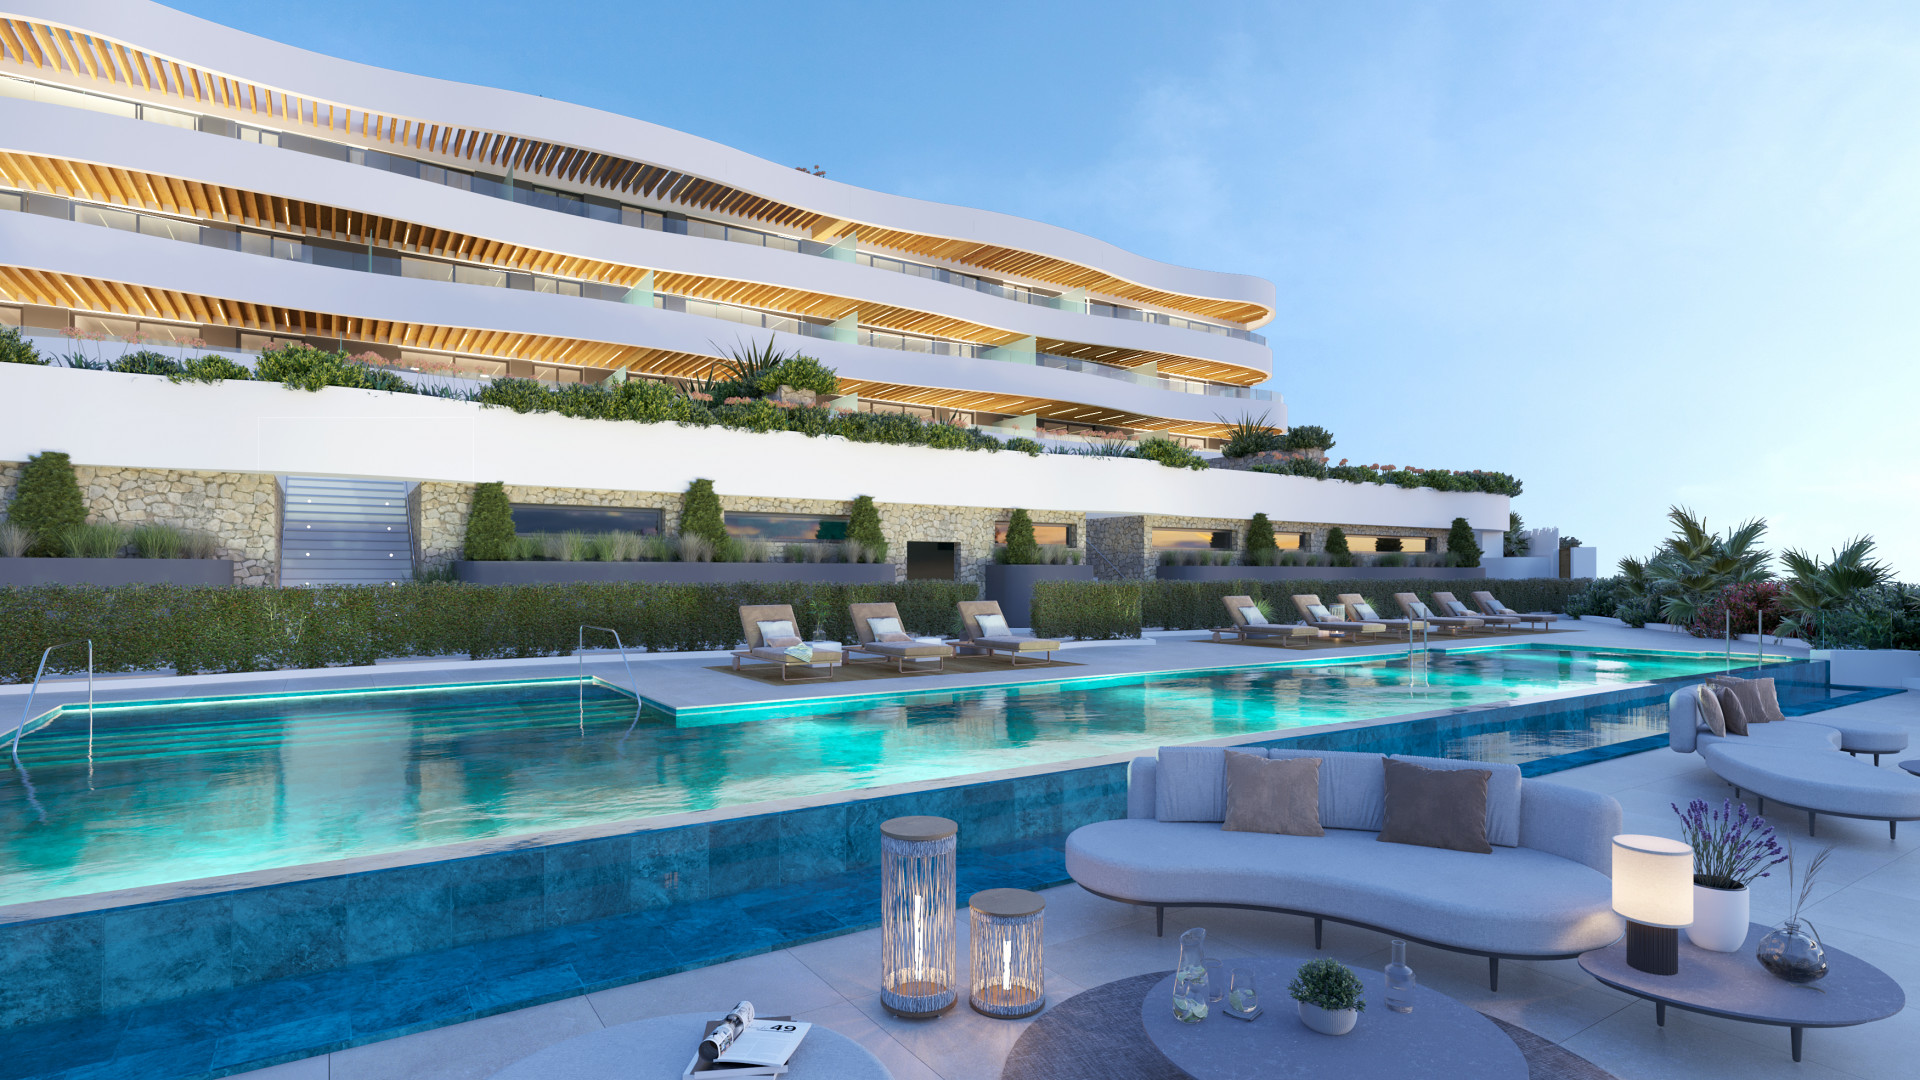 Elysea Suites: New residential project comprising 22 homes located in the Mijas Costa area.